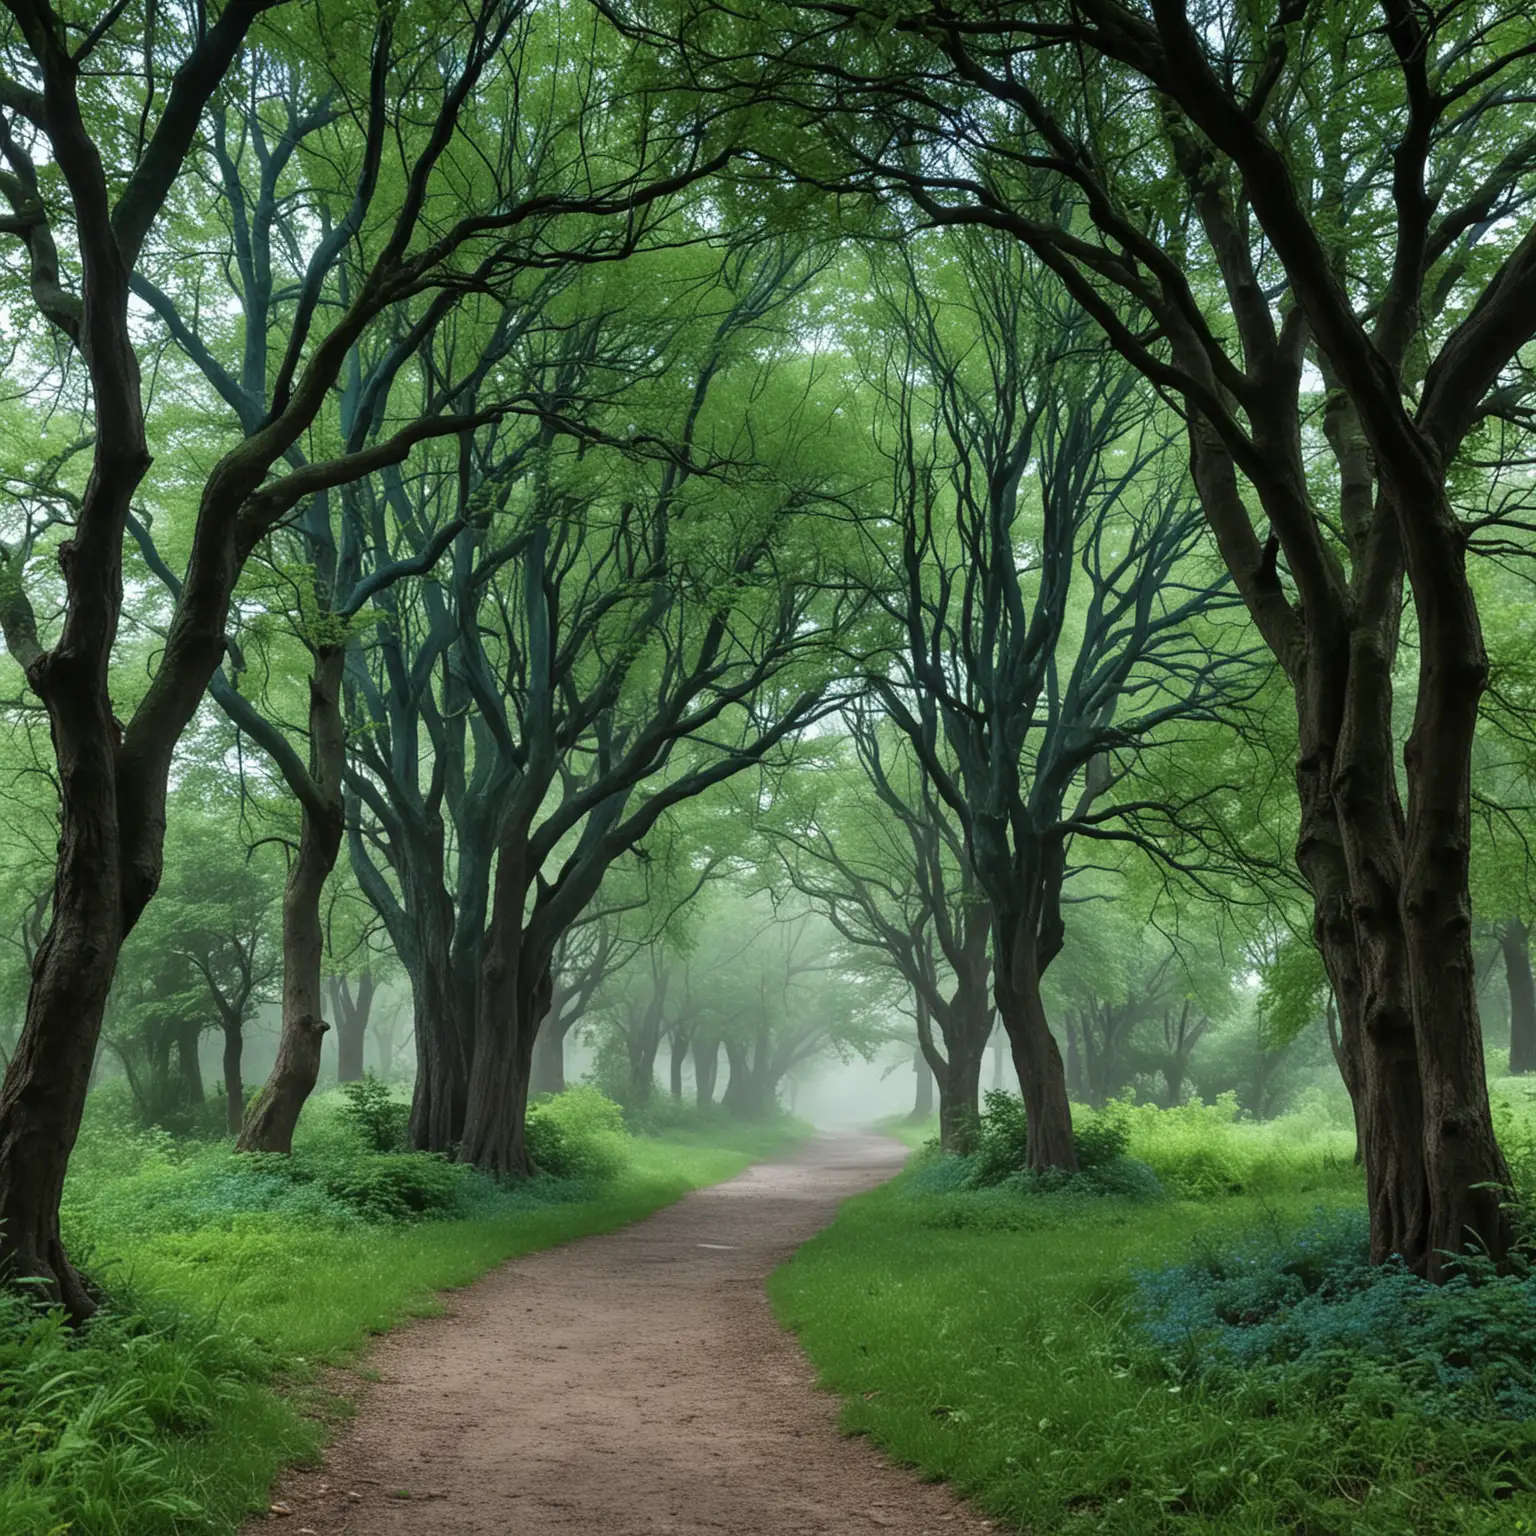 Tranquil-Path-Through-BlueGreen-Trees-in-Drizzling-Rain